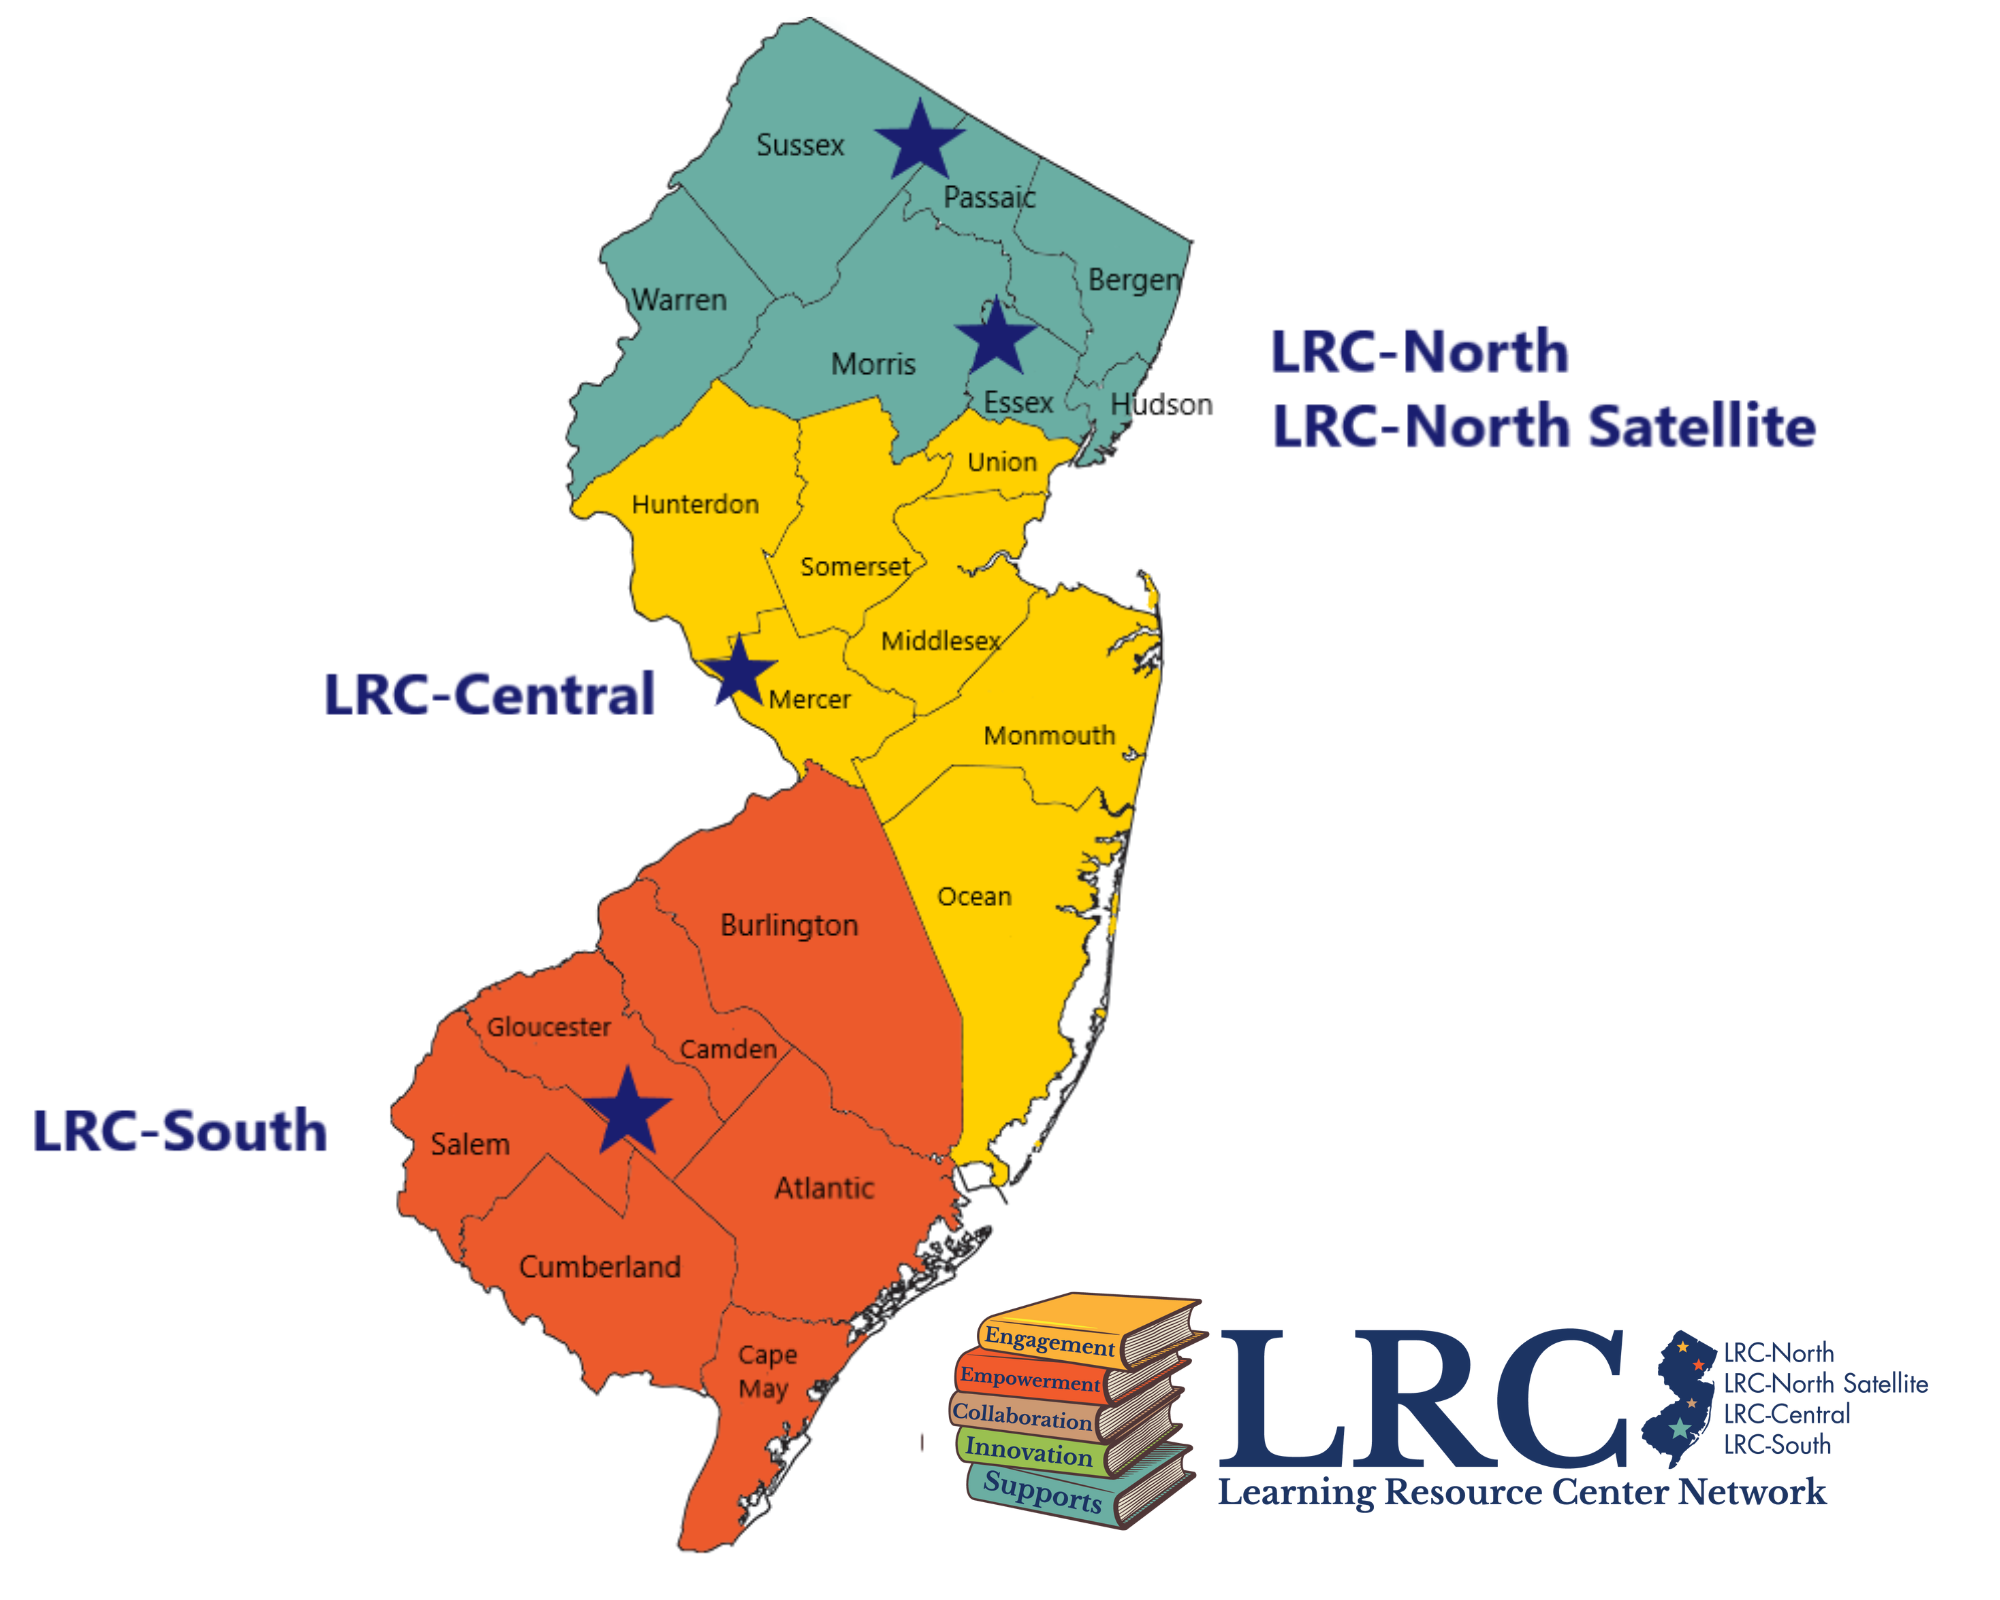 image of NJ and the locations of the LRC maps color coded to the regions of the state as indicated by the navy stars